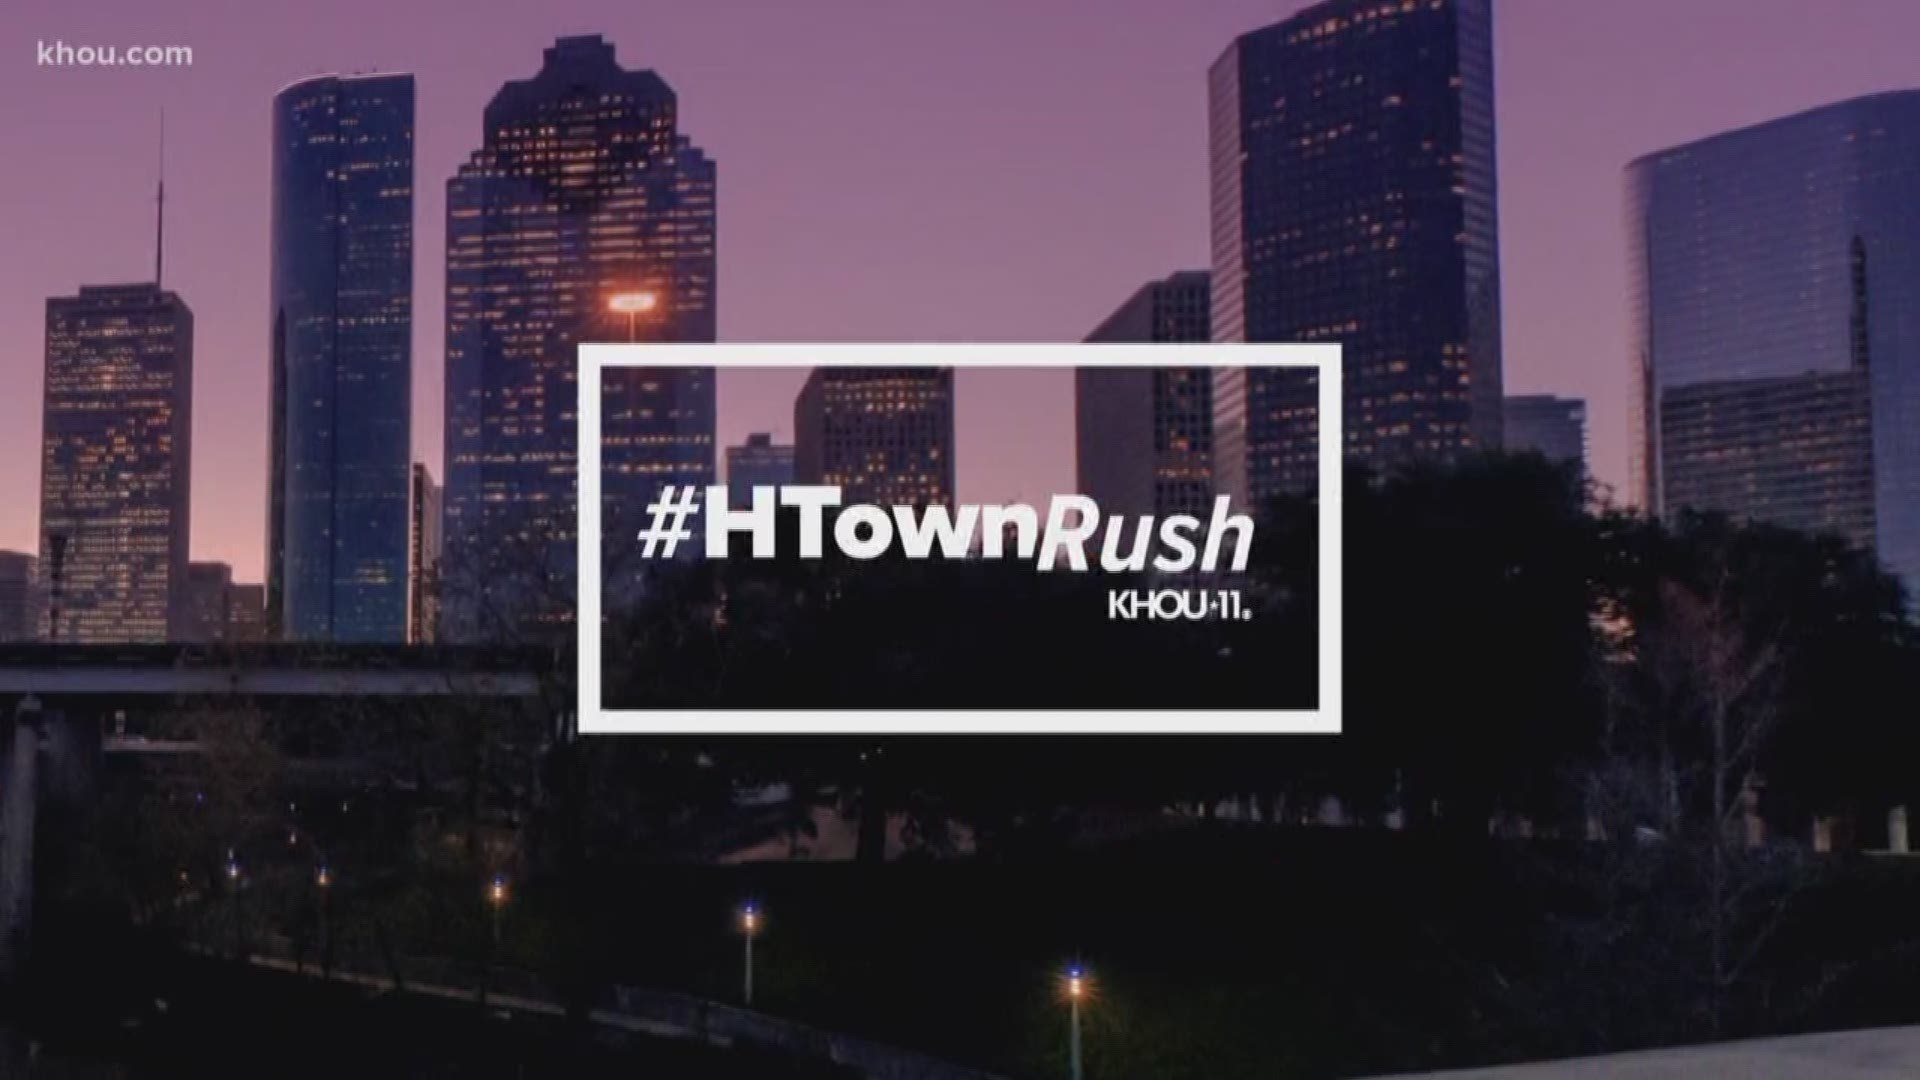 #HTownRush has the top headlines for your Saturday morning.